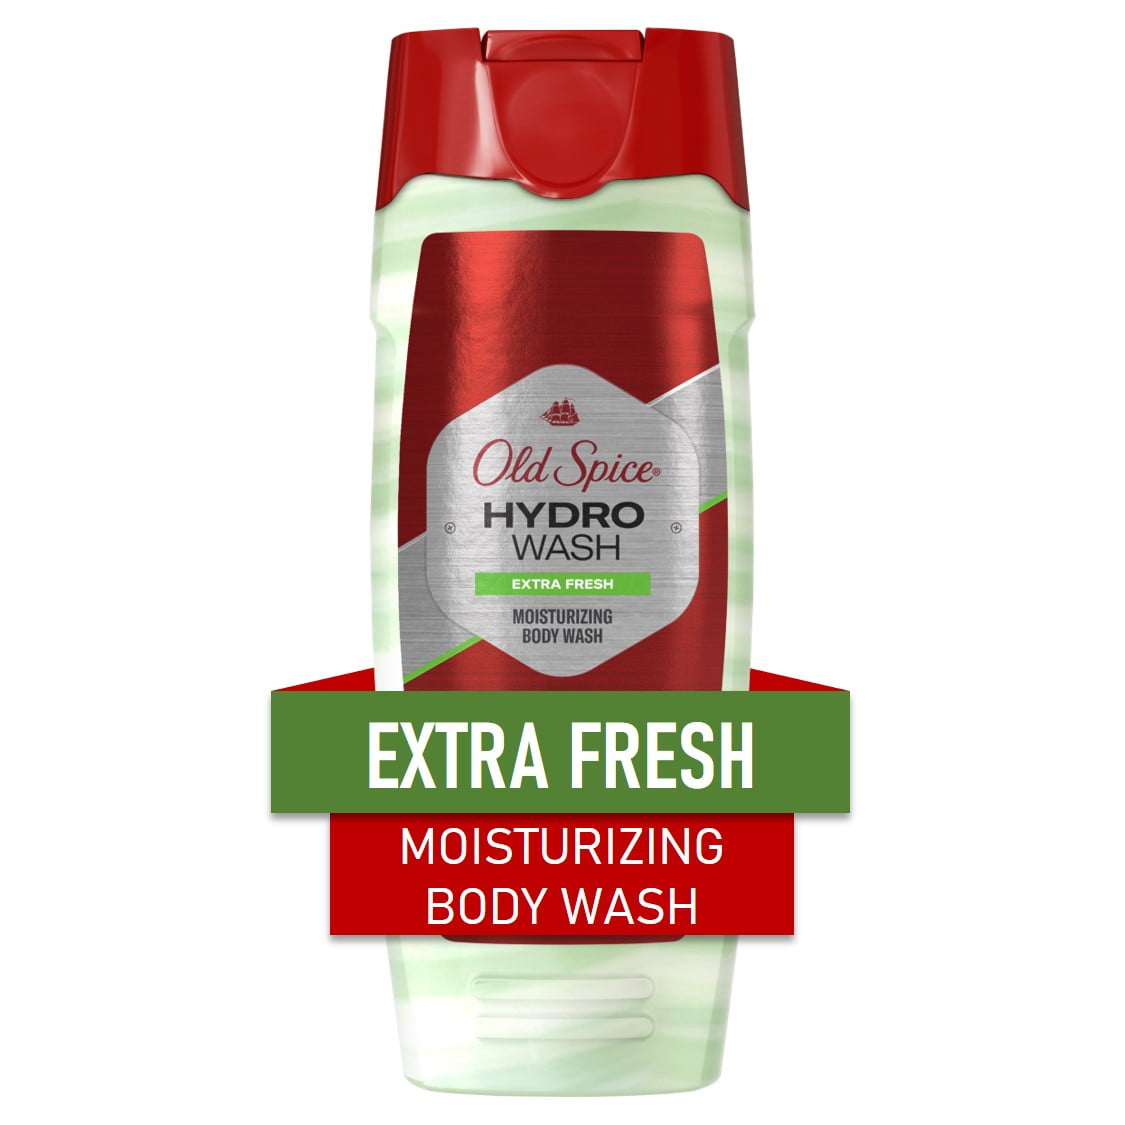  Old Spice Hydro Body Wash for Men, Smoother Swagger Scent,  Hardest Working Collection, 16 Ounce (Pack of 4) : Beauty & Personal Care